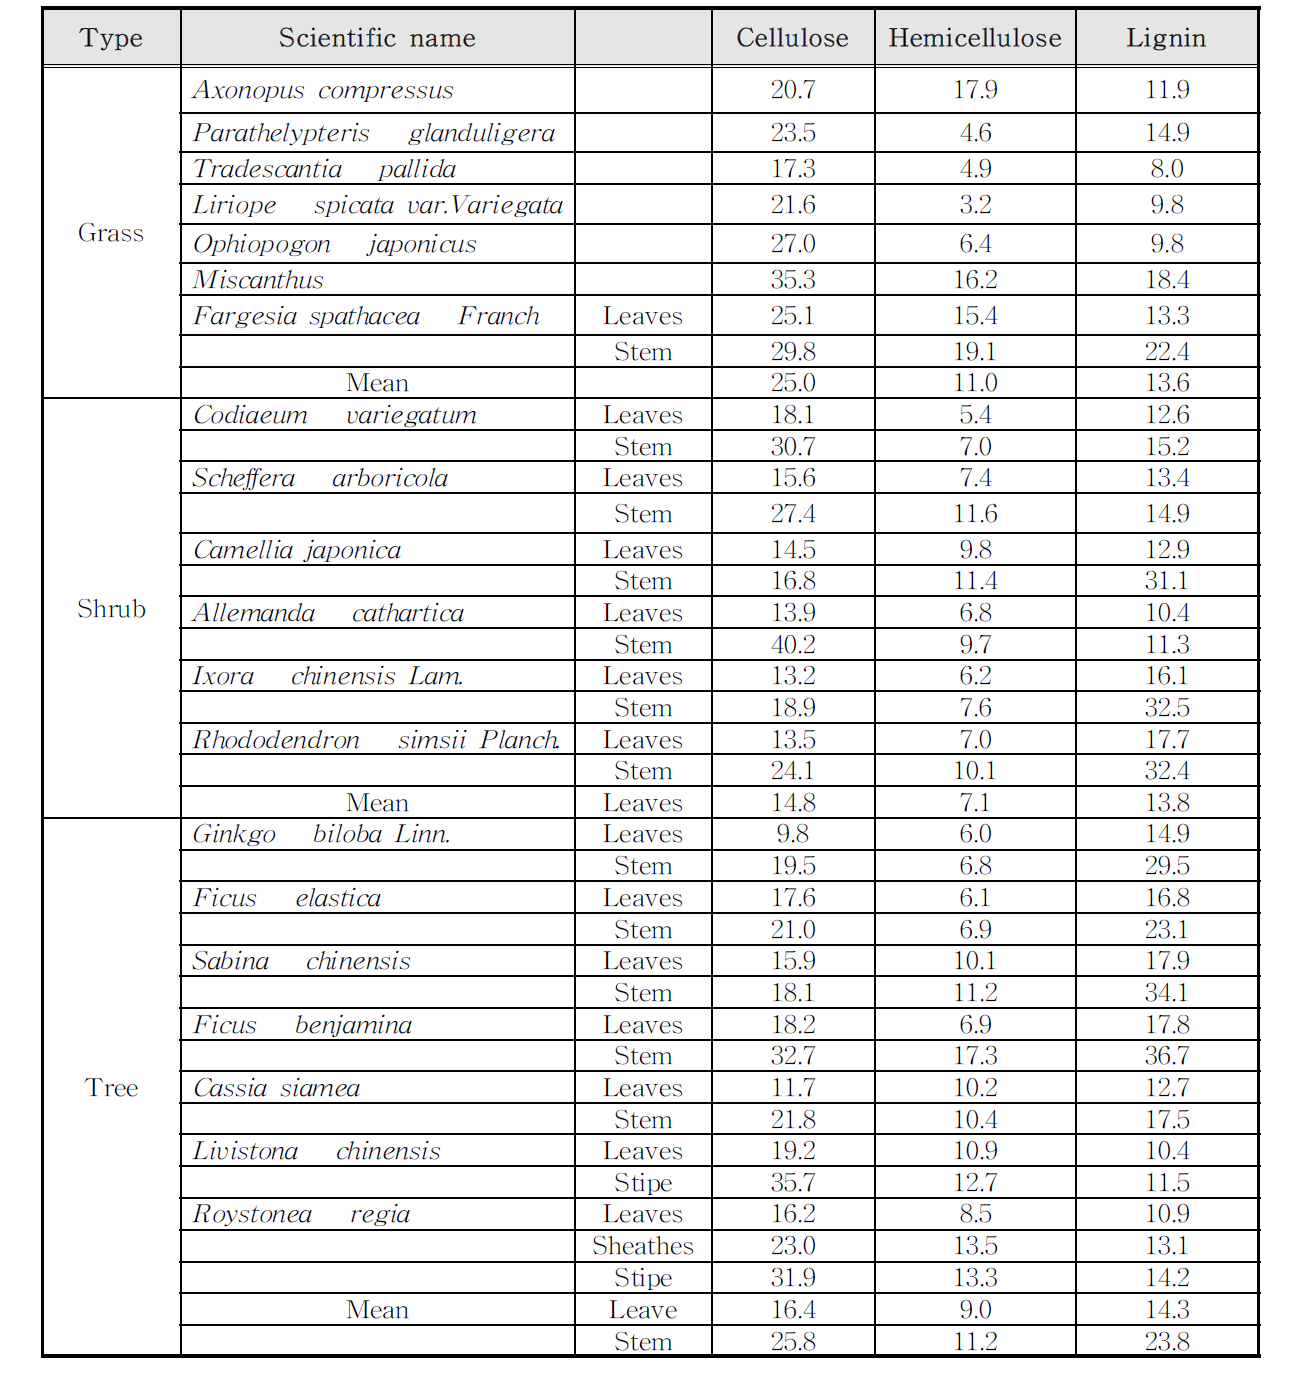 The chemical composition (WT%) of the collected samples